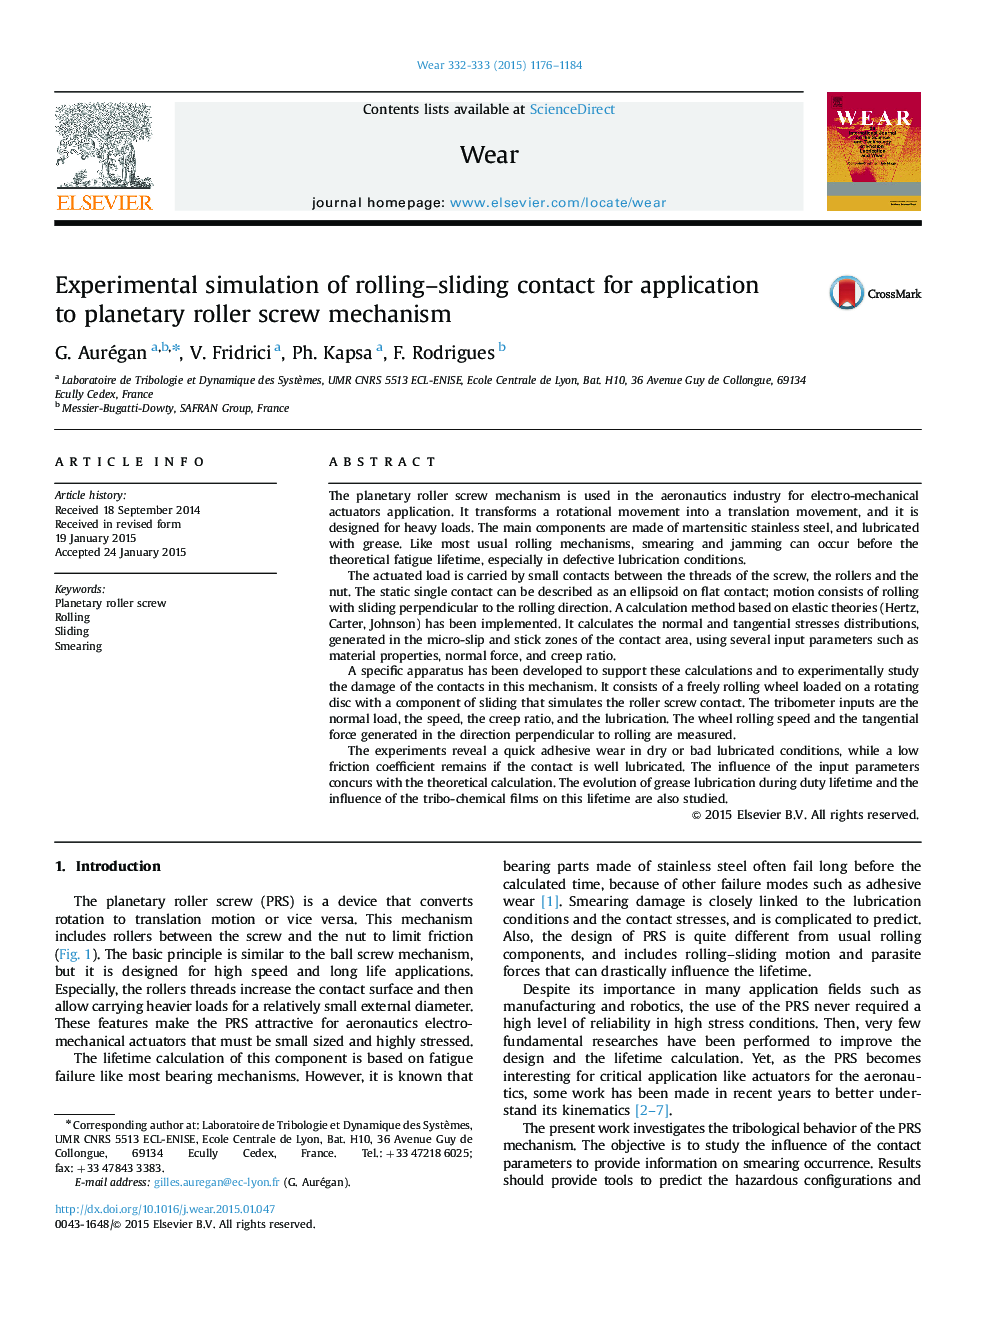 Experimental simulation of rolling–sliding contact for application to planetary roller screw mechanism